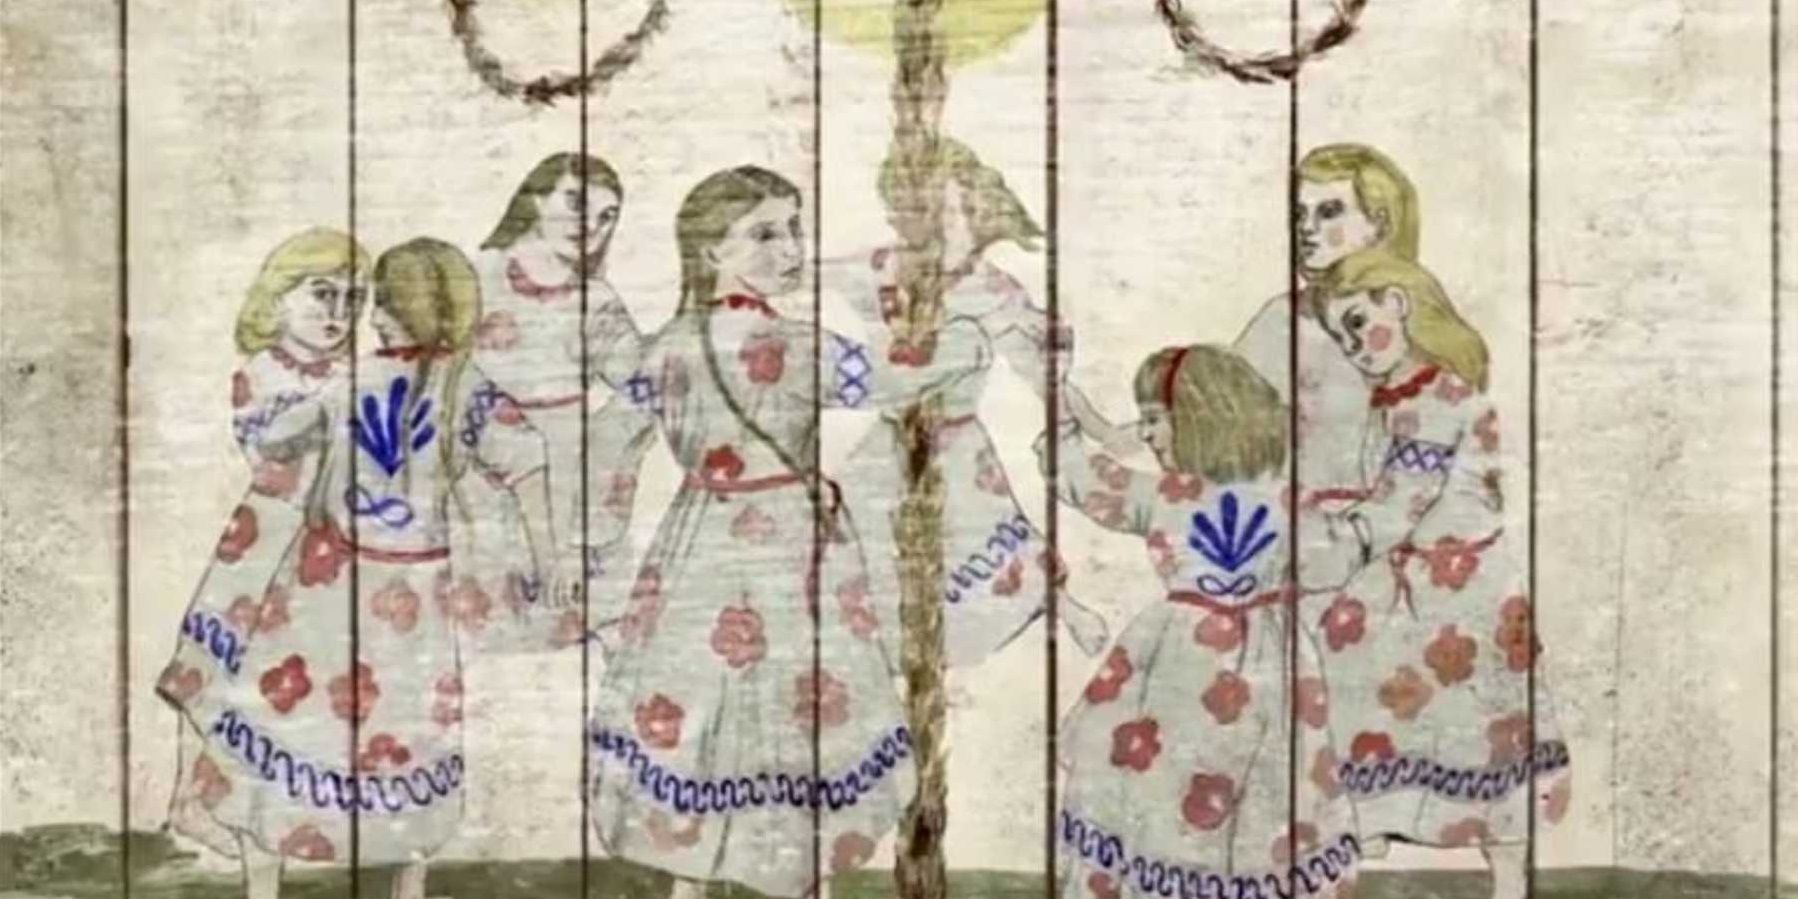 A tapestry of the dance in Midsommar